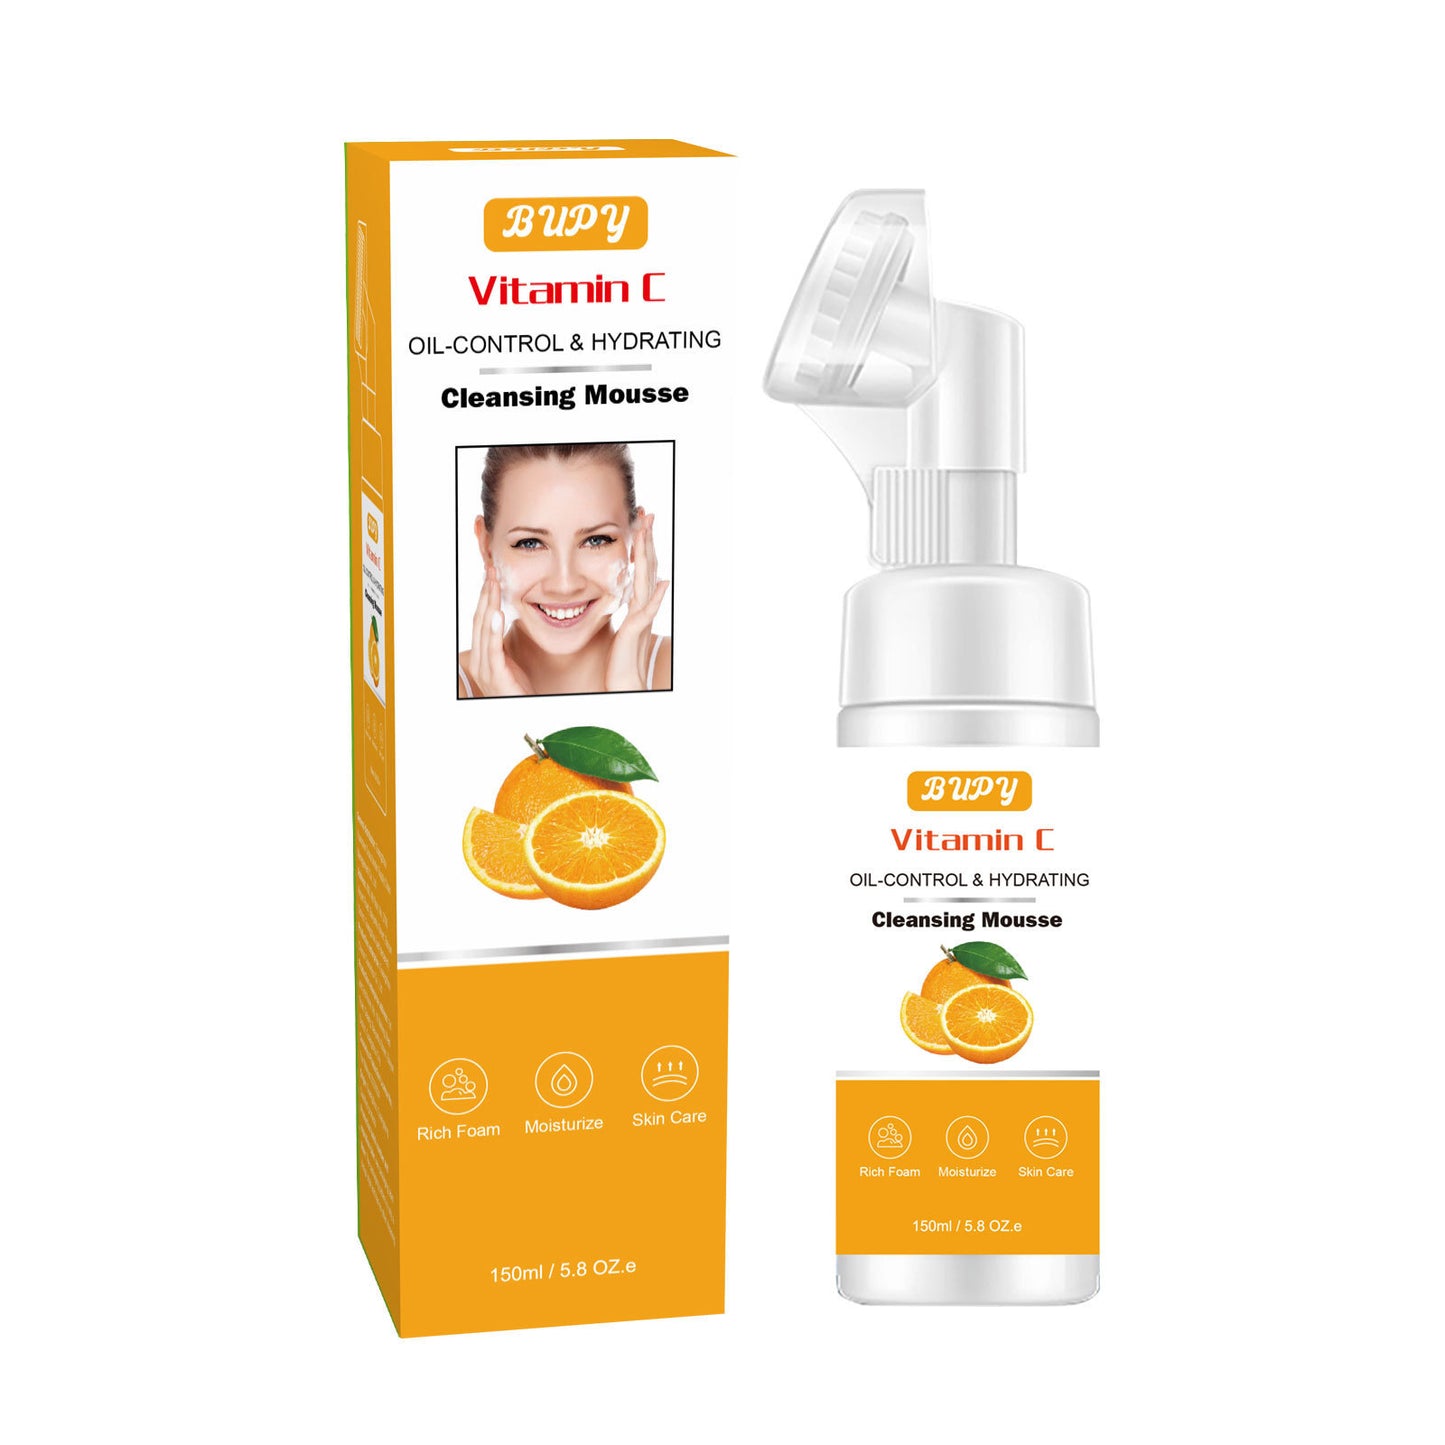 Customized Sweet Orange Vitamin C Facial Cleansing Mousse, Moisturizing, Cleansing and Makeup Removal 2-in-1, Amino Acid Facial Cleansing Mousse 328